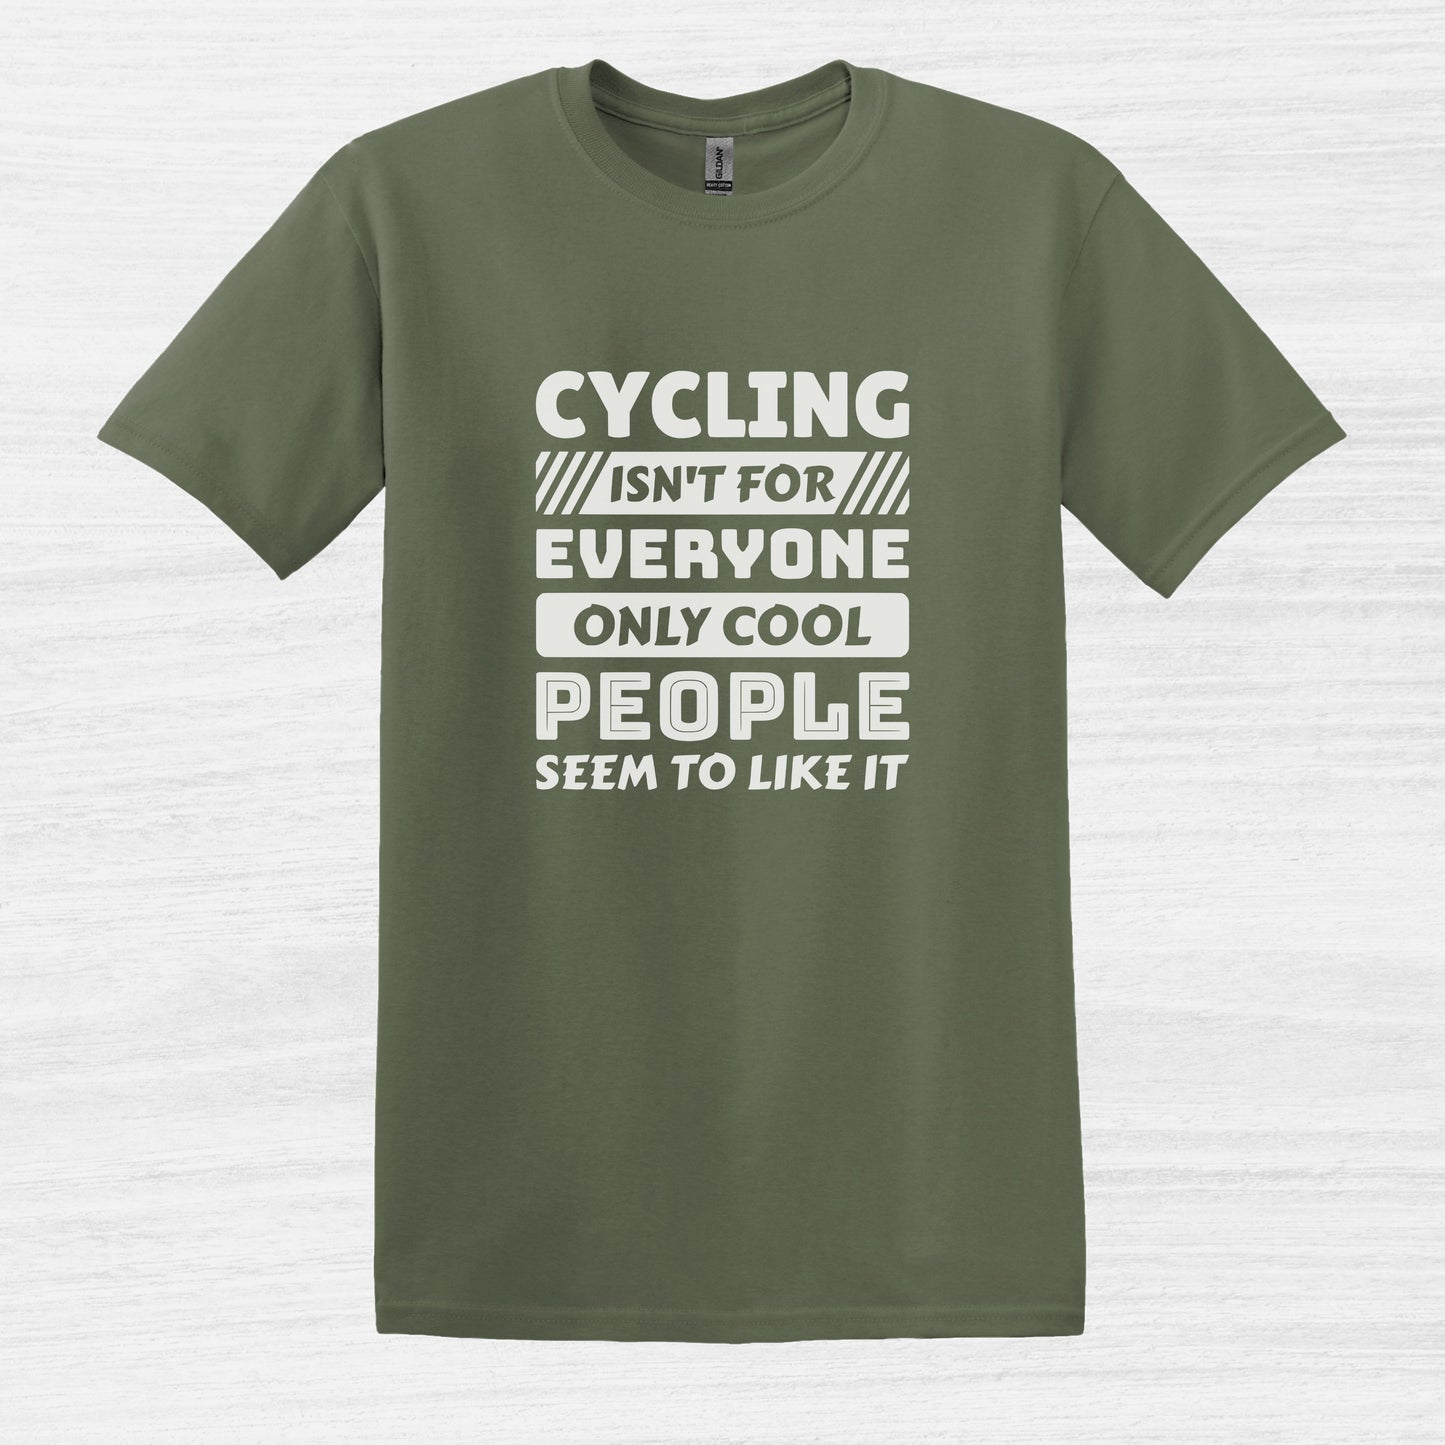 Bike Bliss Cycling isn't for everyone only Cool People seem to like it T-Shirt for Men Military Green 2